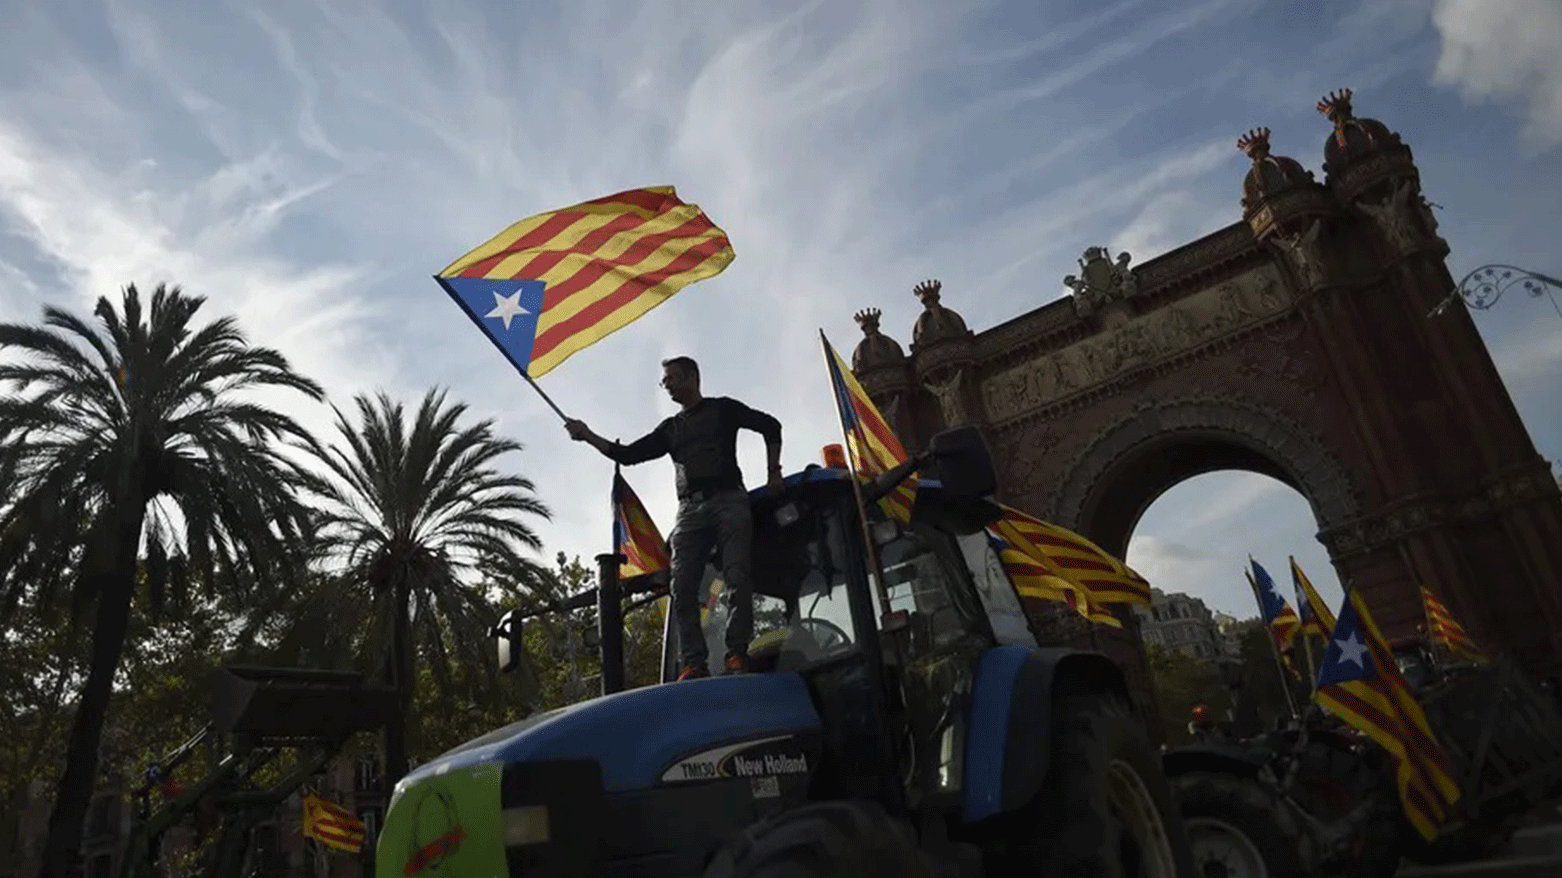 Supporters of Catalan independence wave Catalan flags as they drive with tractors through the Arc de Triomf (Triumphal Arch) in Barcelona on October 10, 2017. (Photo: AFP)